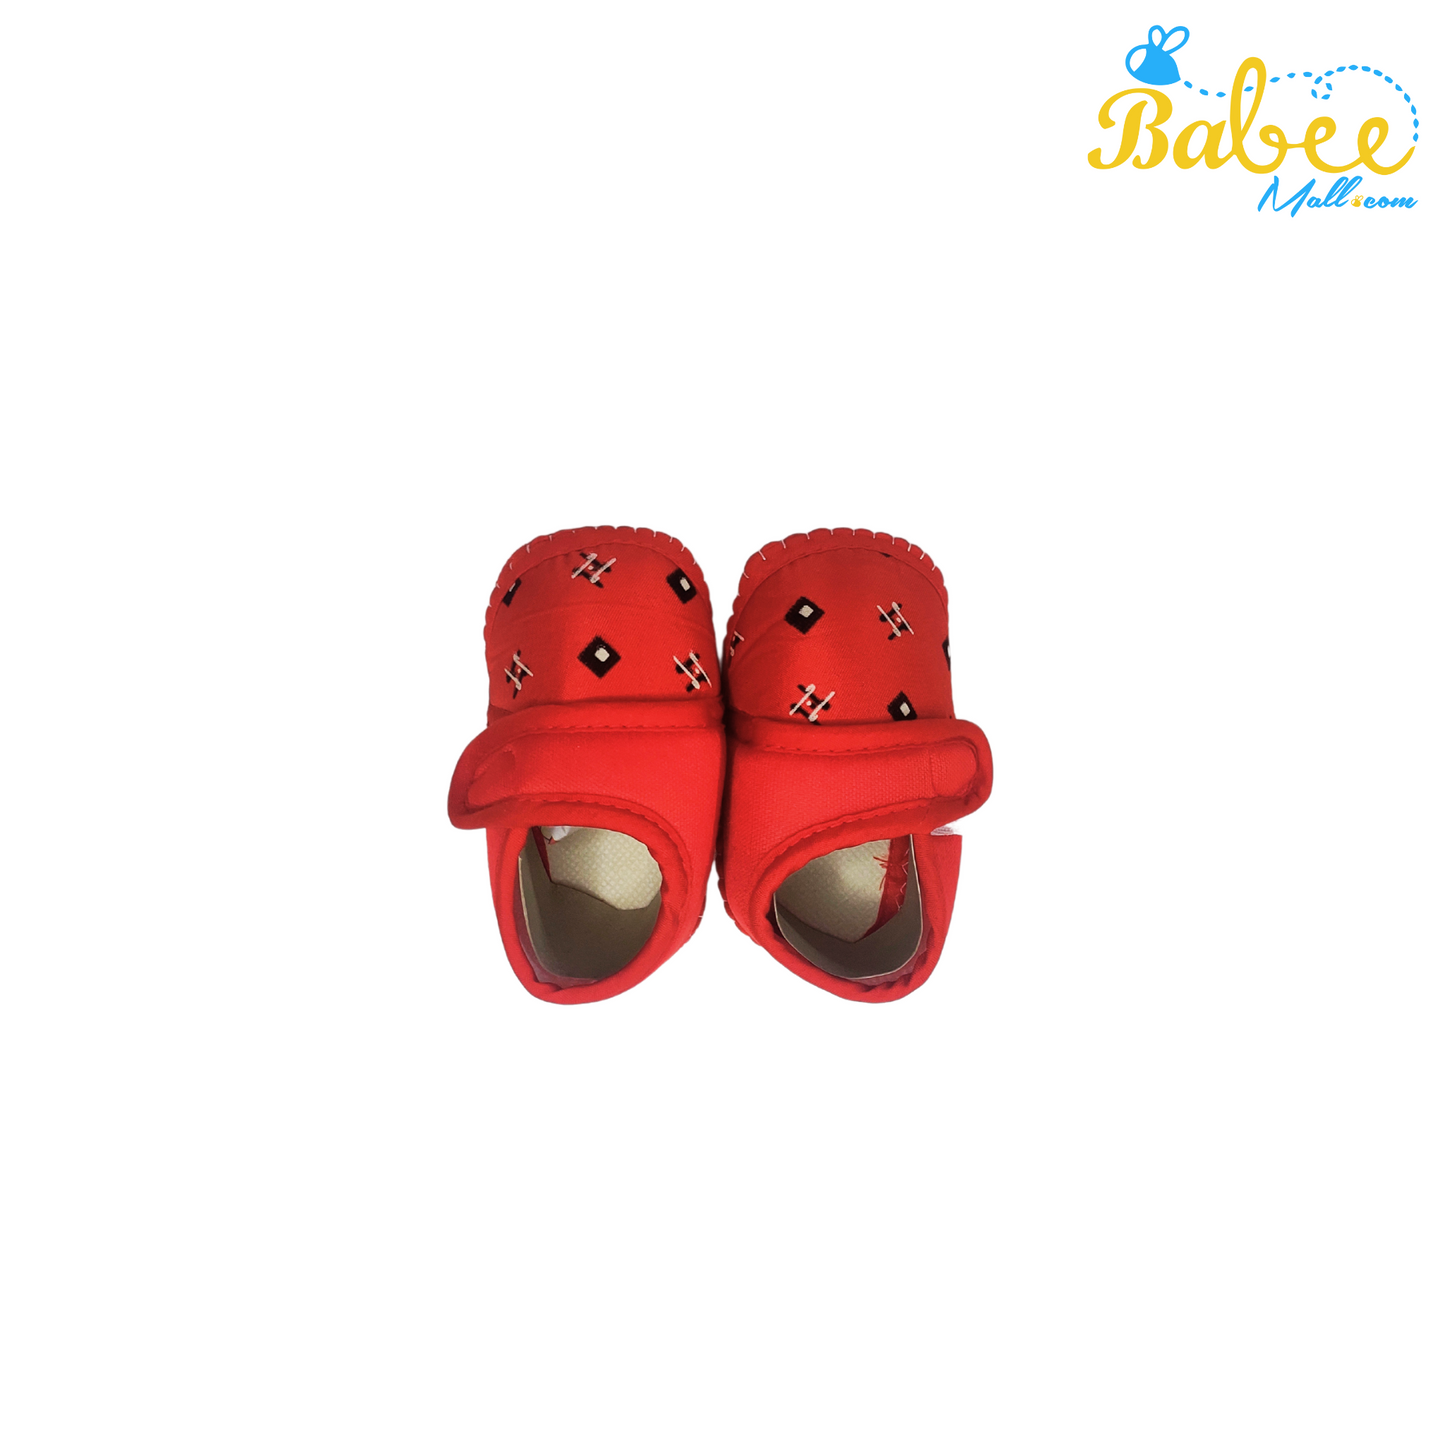 Stylish Newborn Baby Shoes - The Perfect First Steps in Style and Comfort 0-12 Month's (Red)